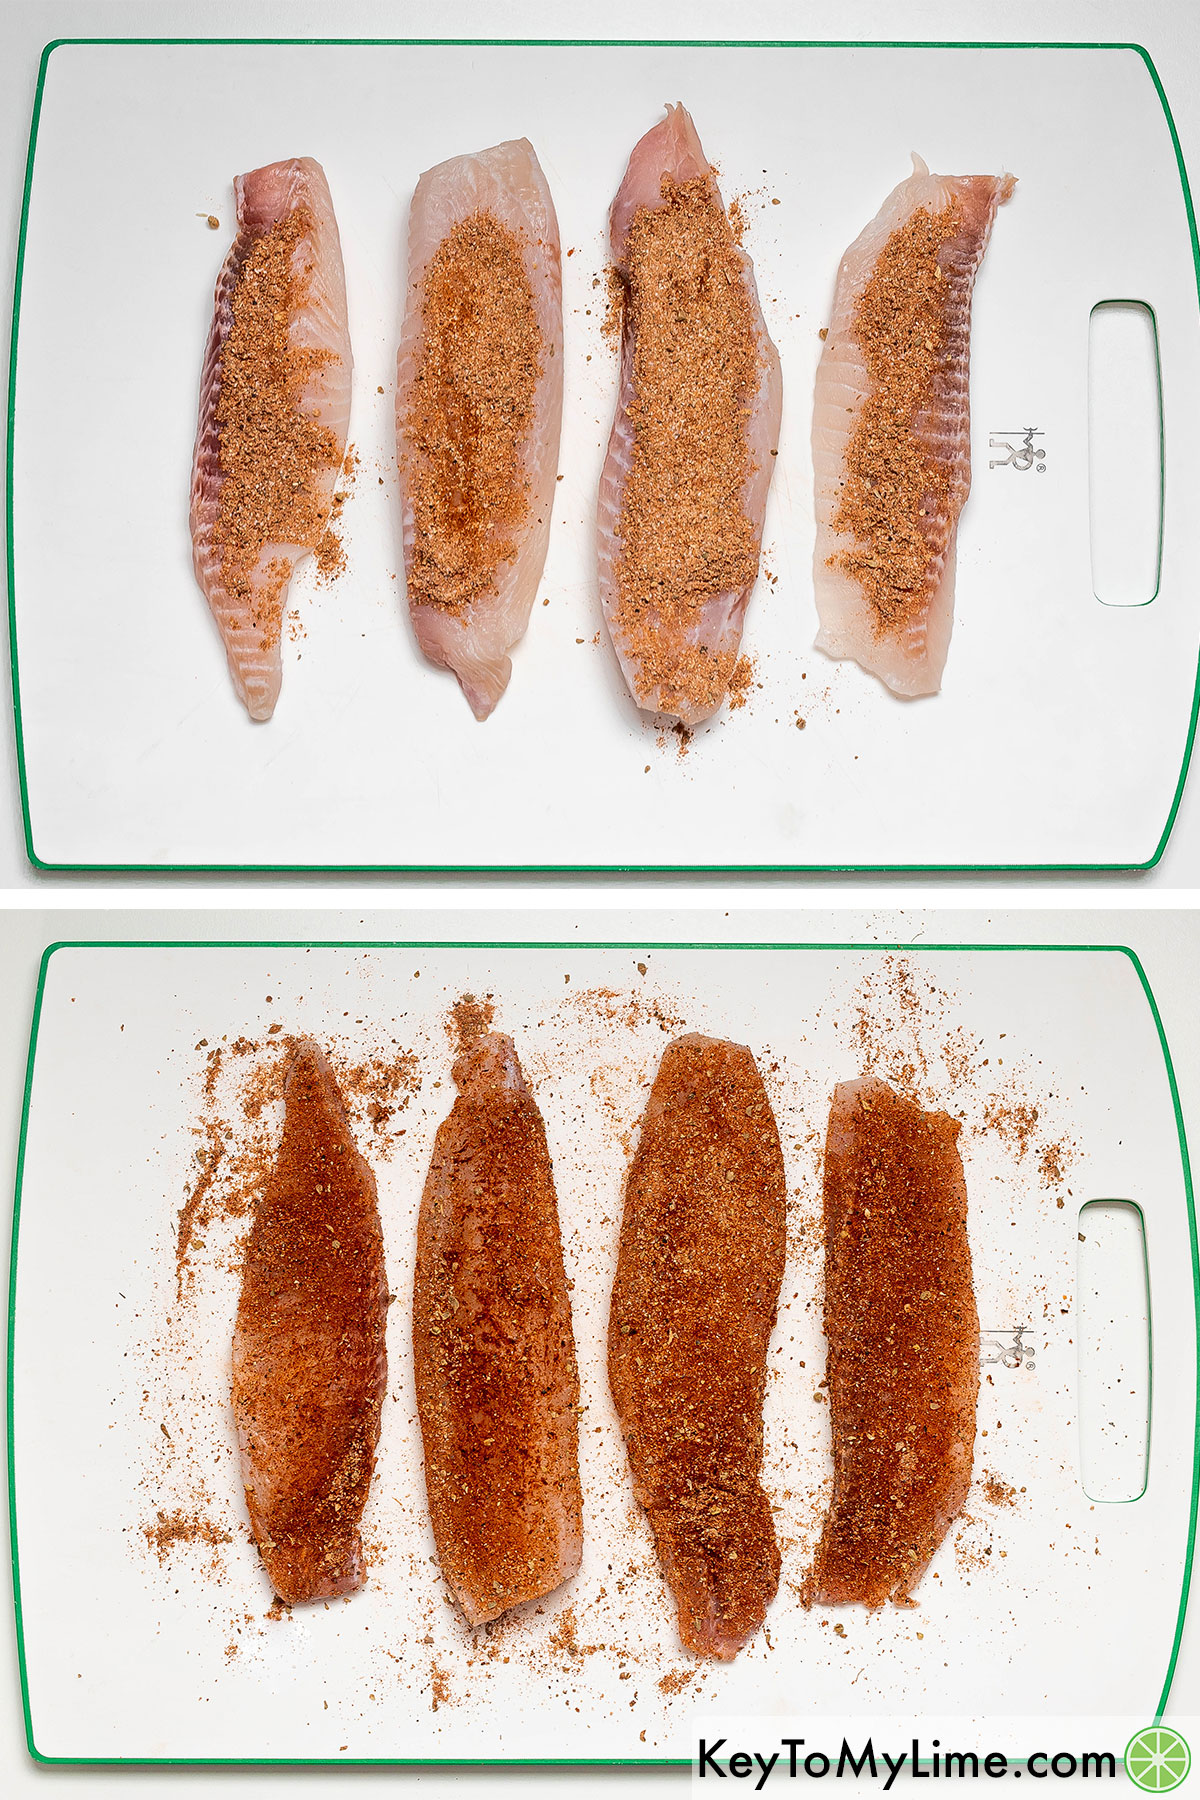 Applying the fish rub to both sides of the filets and then spraying with cooking oil.